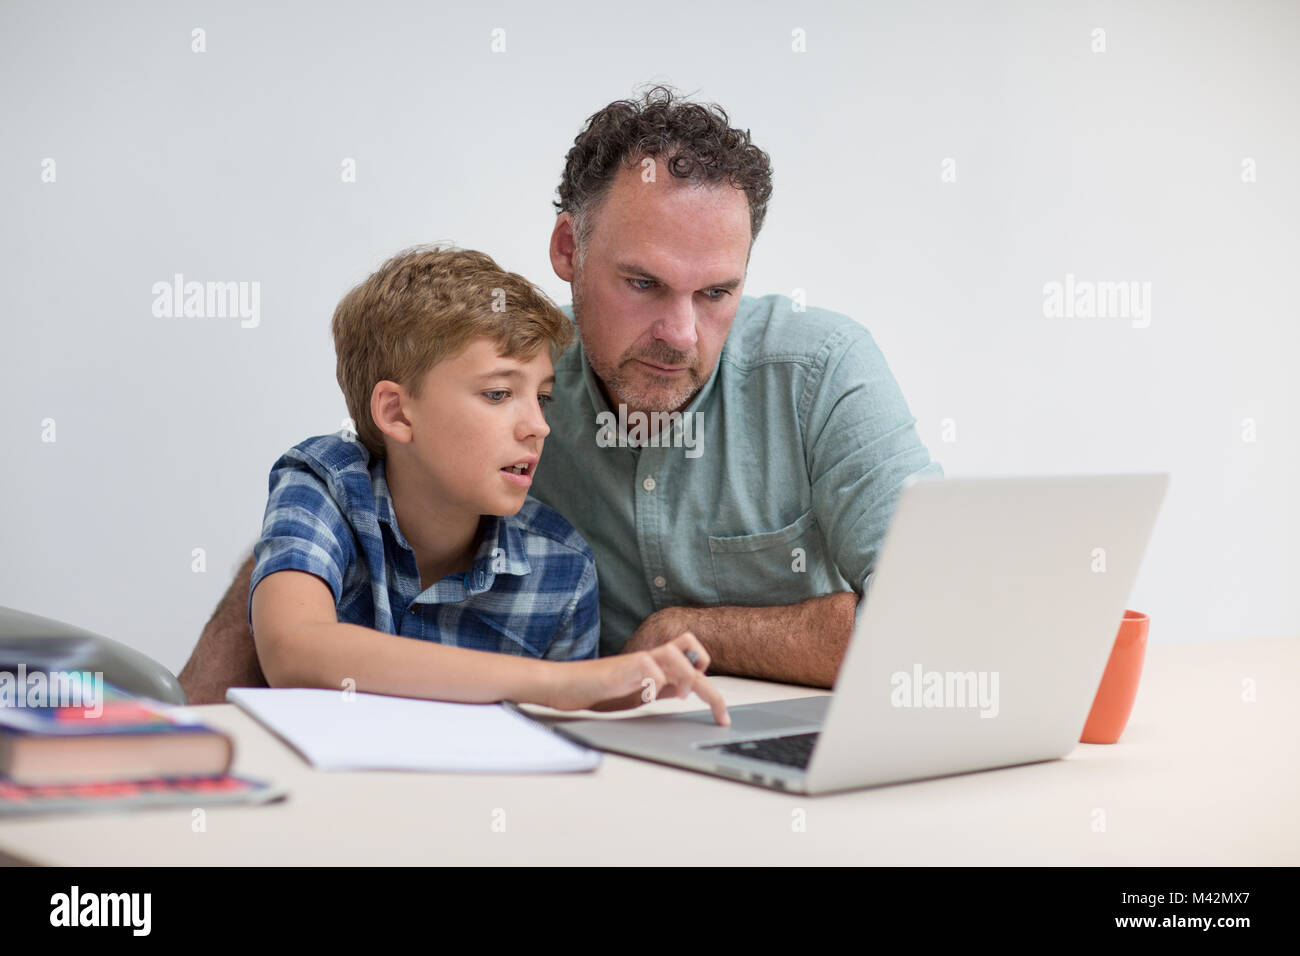 Father helping son with homework Stock Photo